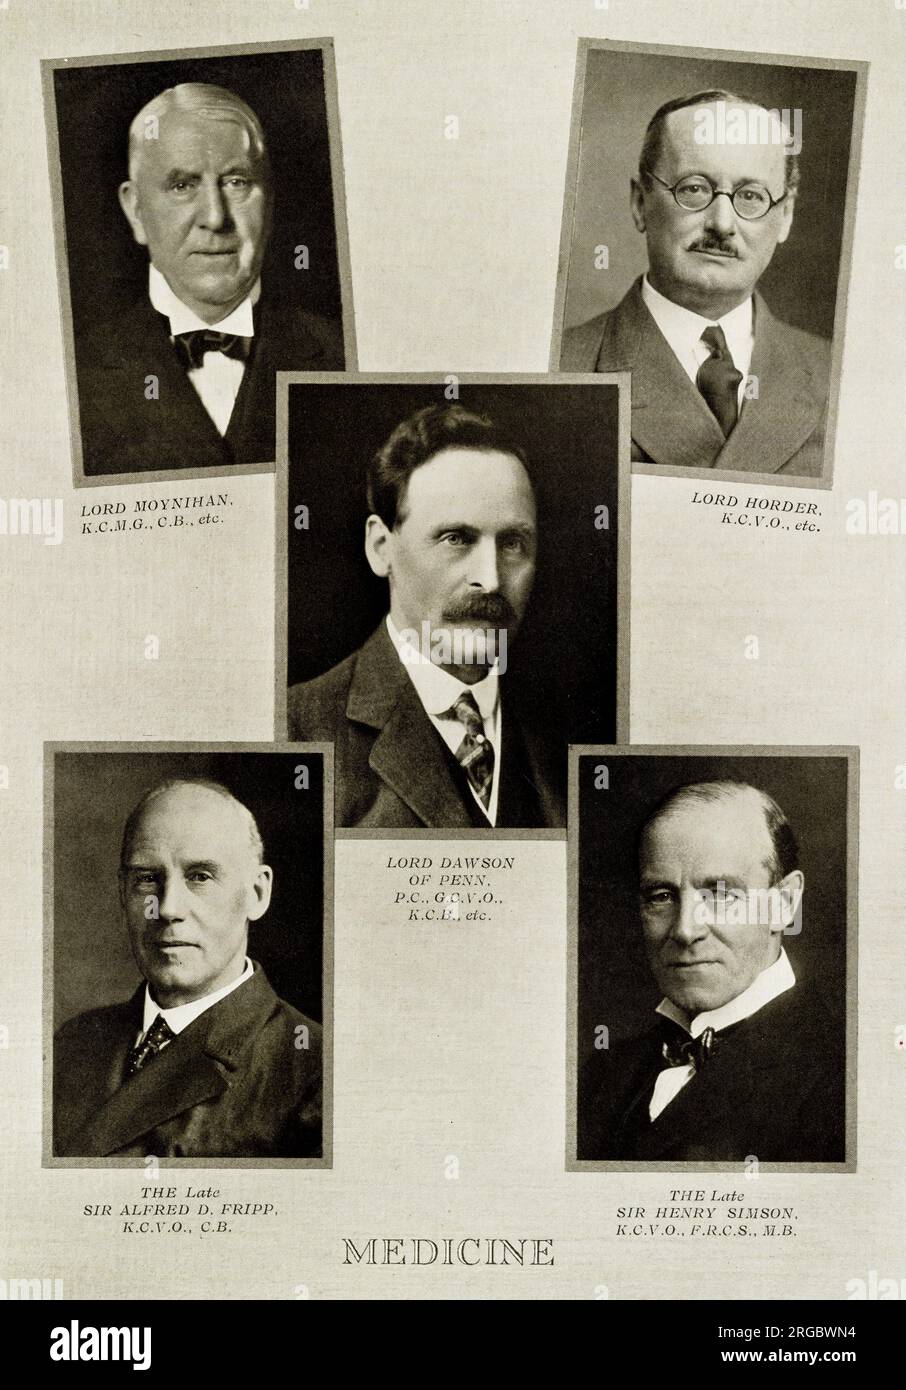 Leaders in medicine during the first 25 years of the reign of King George V: Moynihan, Horder, Lord Dawson of Penn, Fripp, Simson. Stock Photo